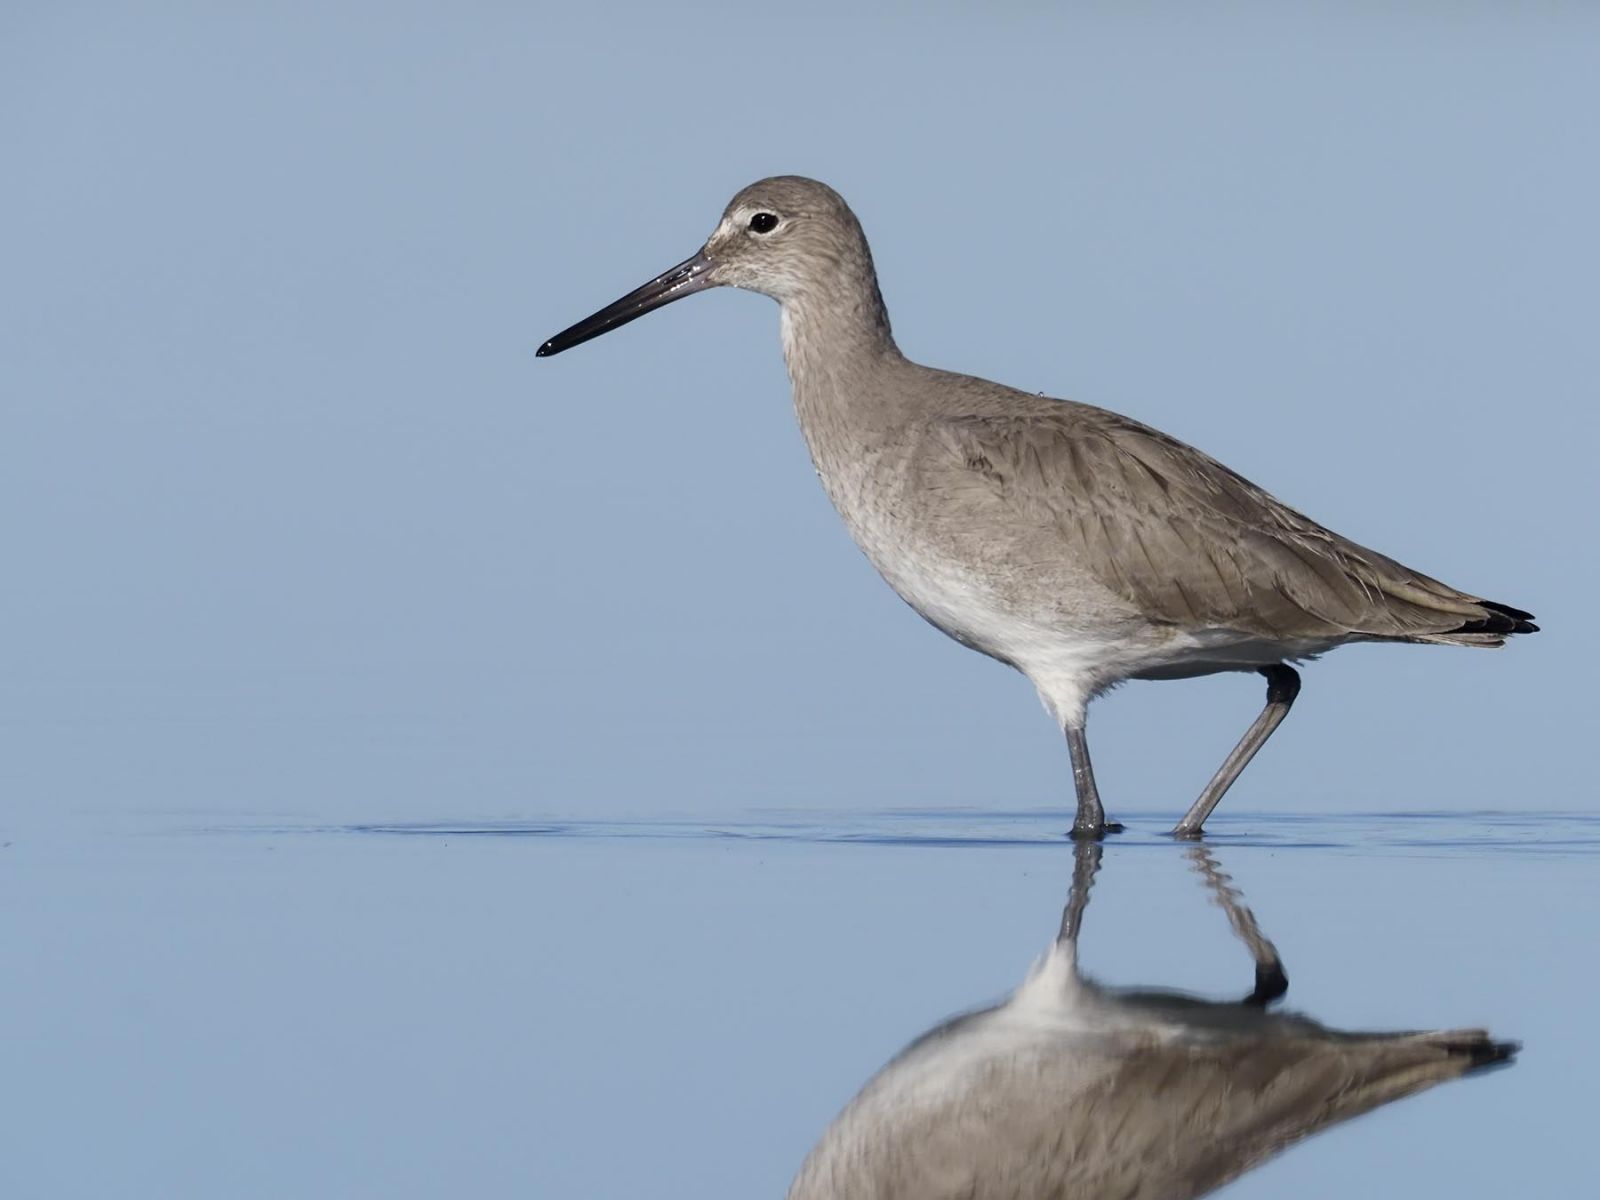 A Willet on the beach